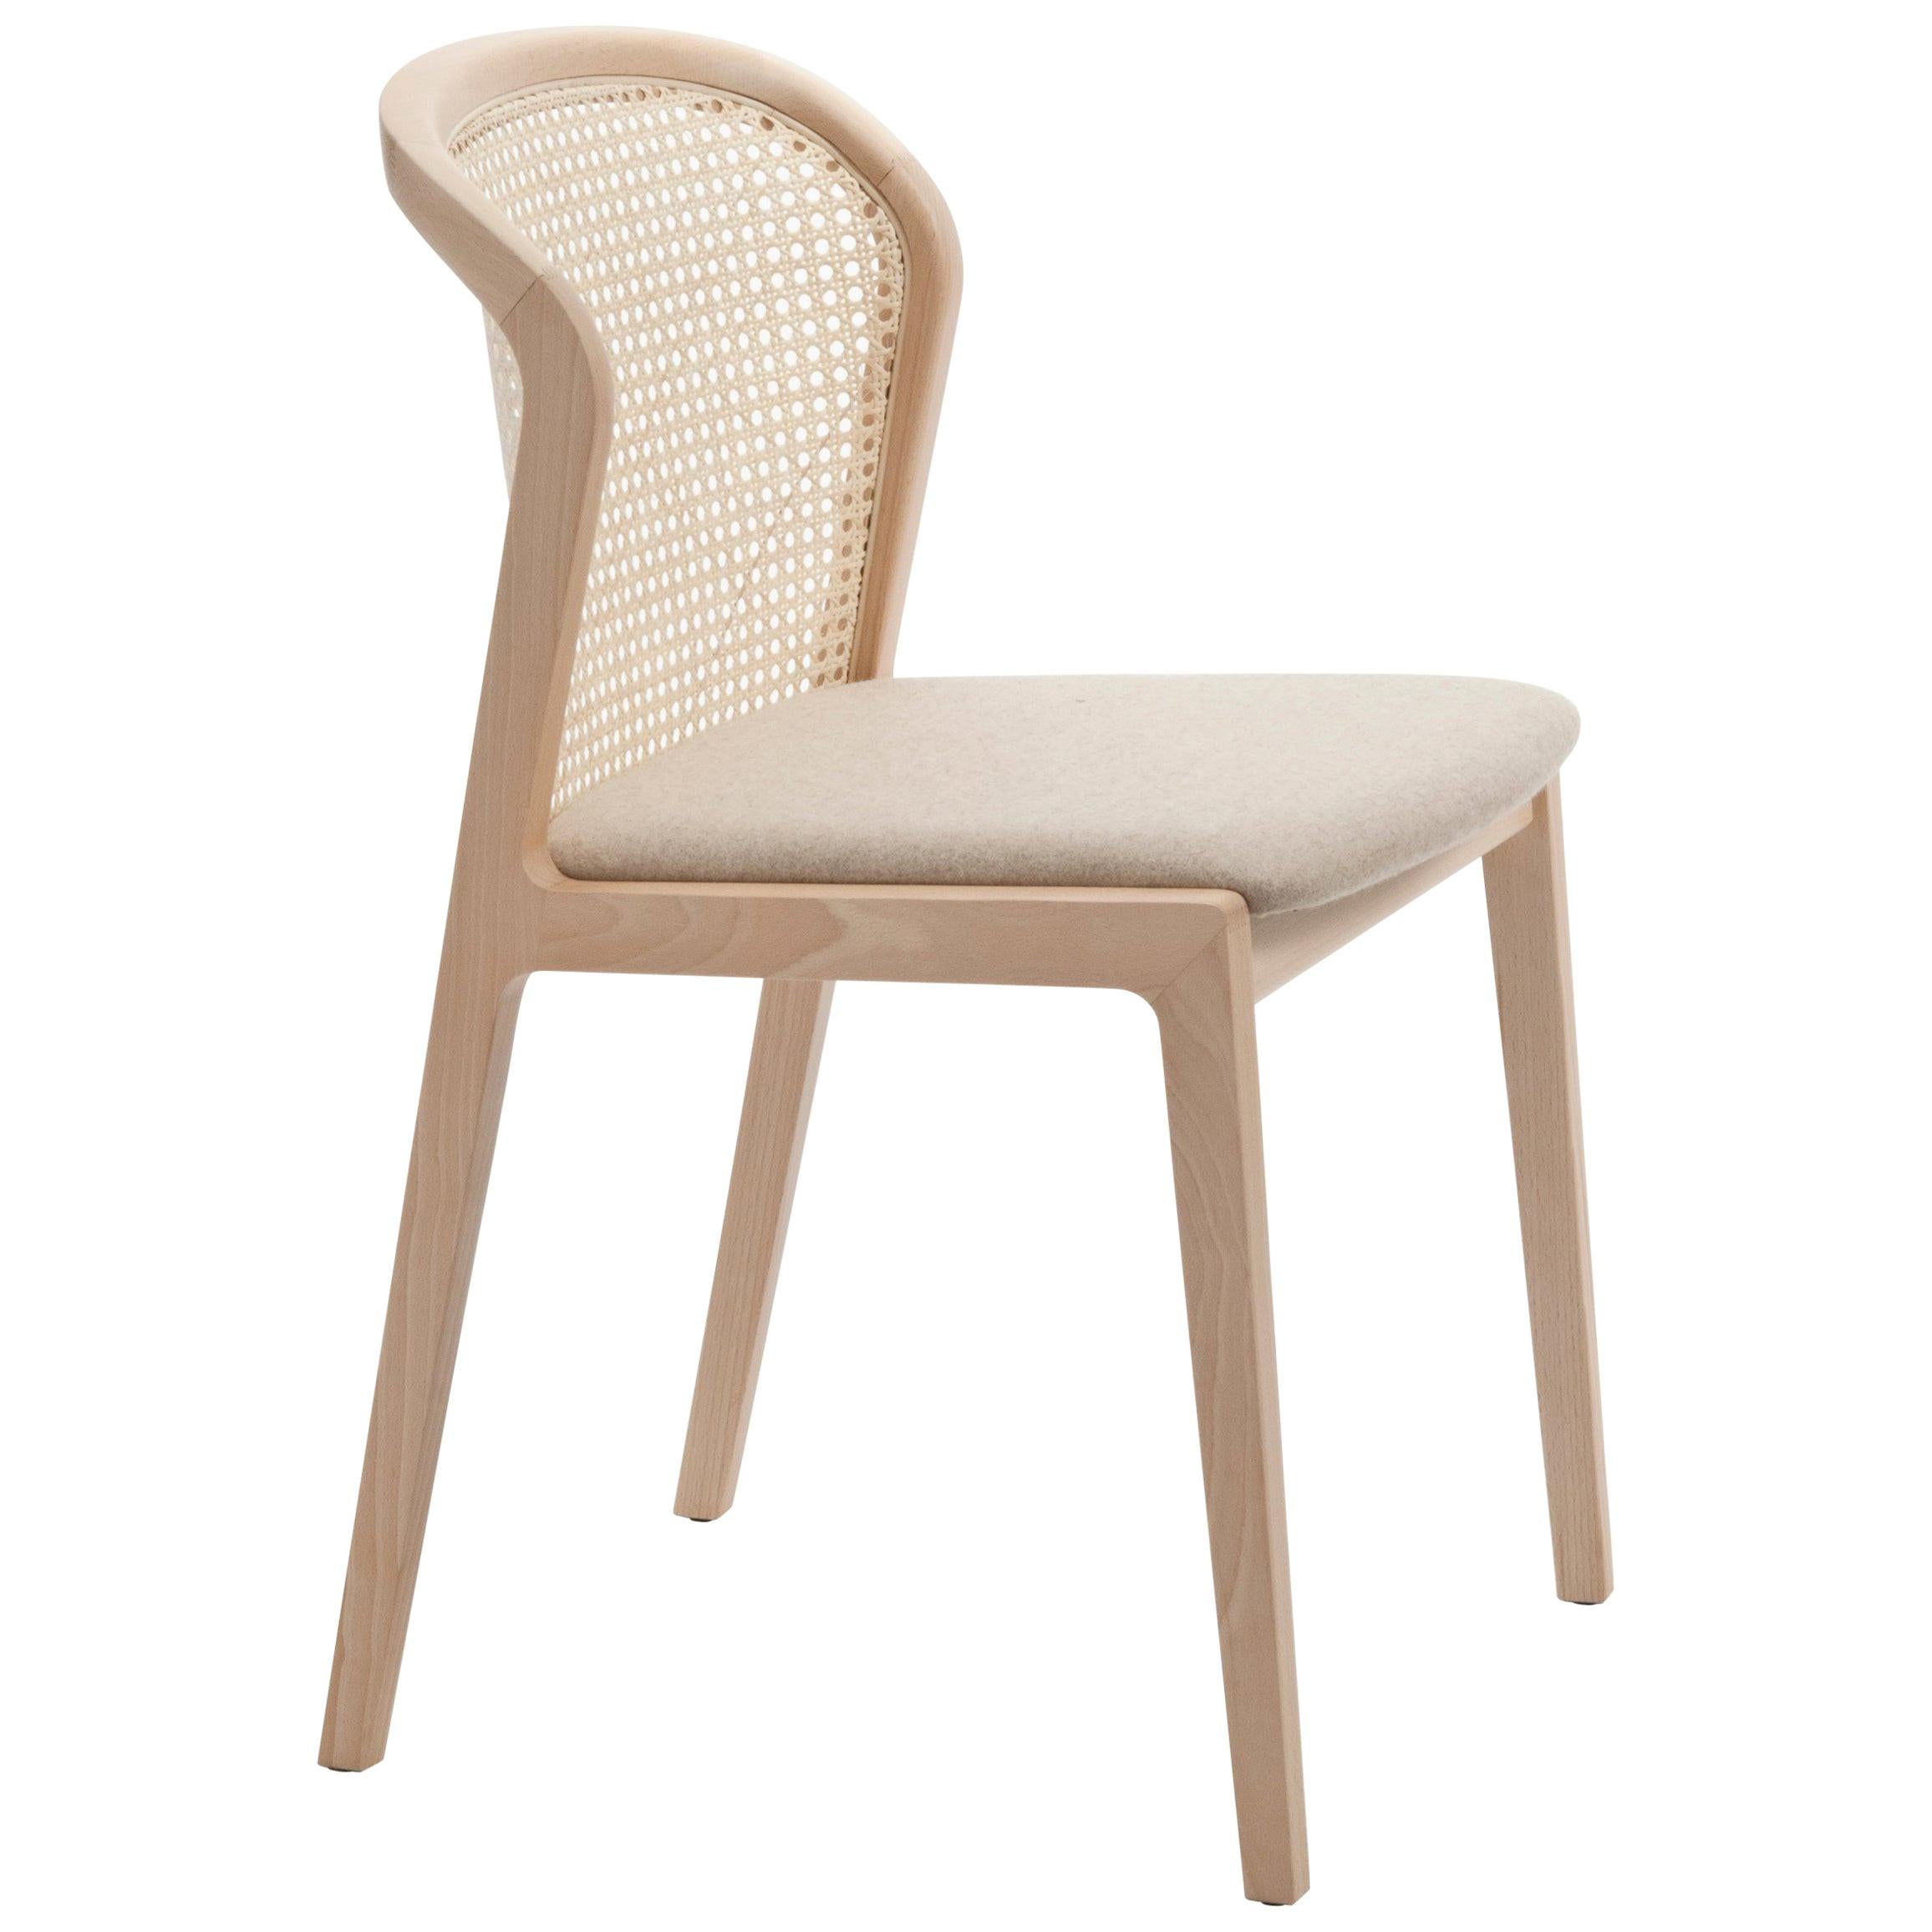 Vienna Chair, in Beach Wood and Straw, Beige Full Grain Leather Padded Seat